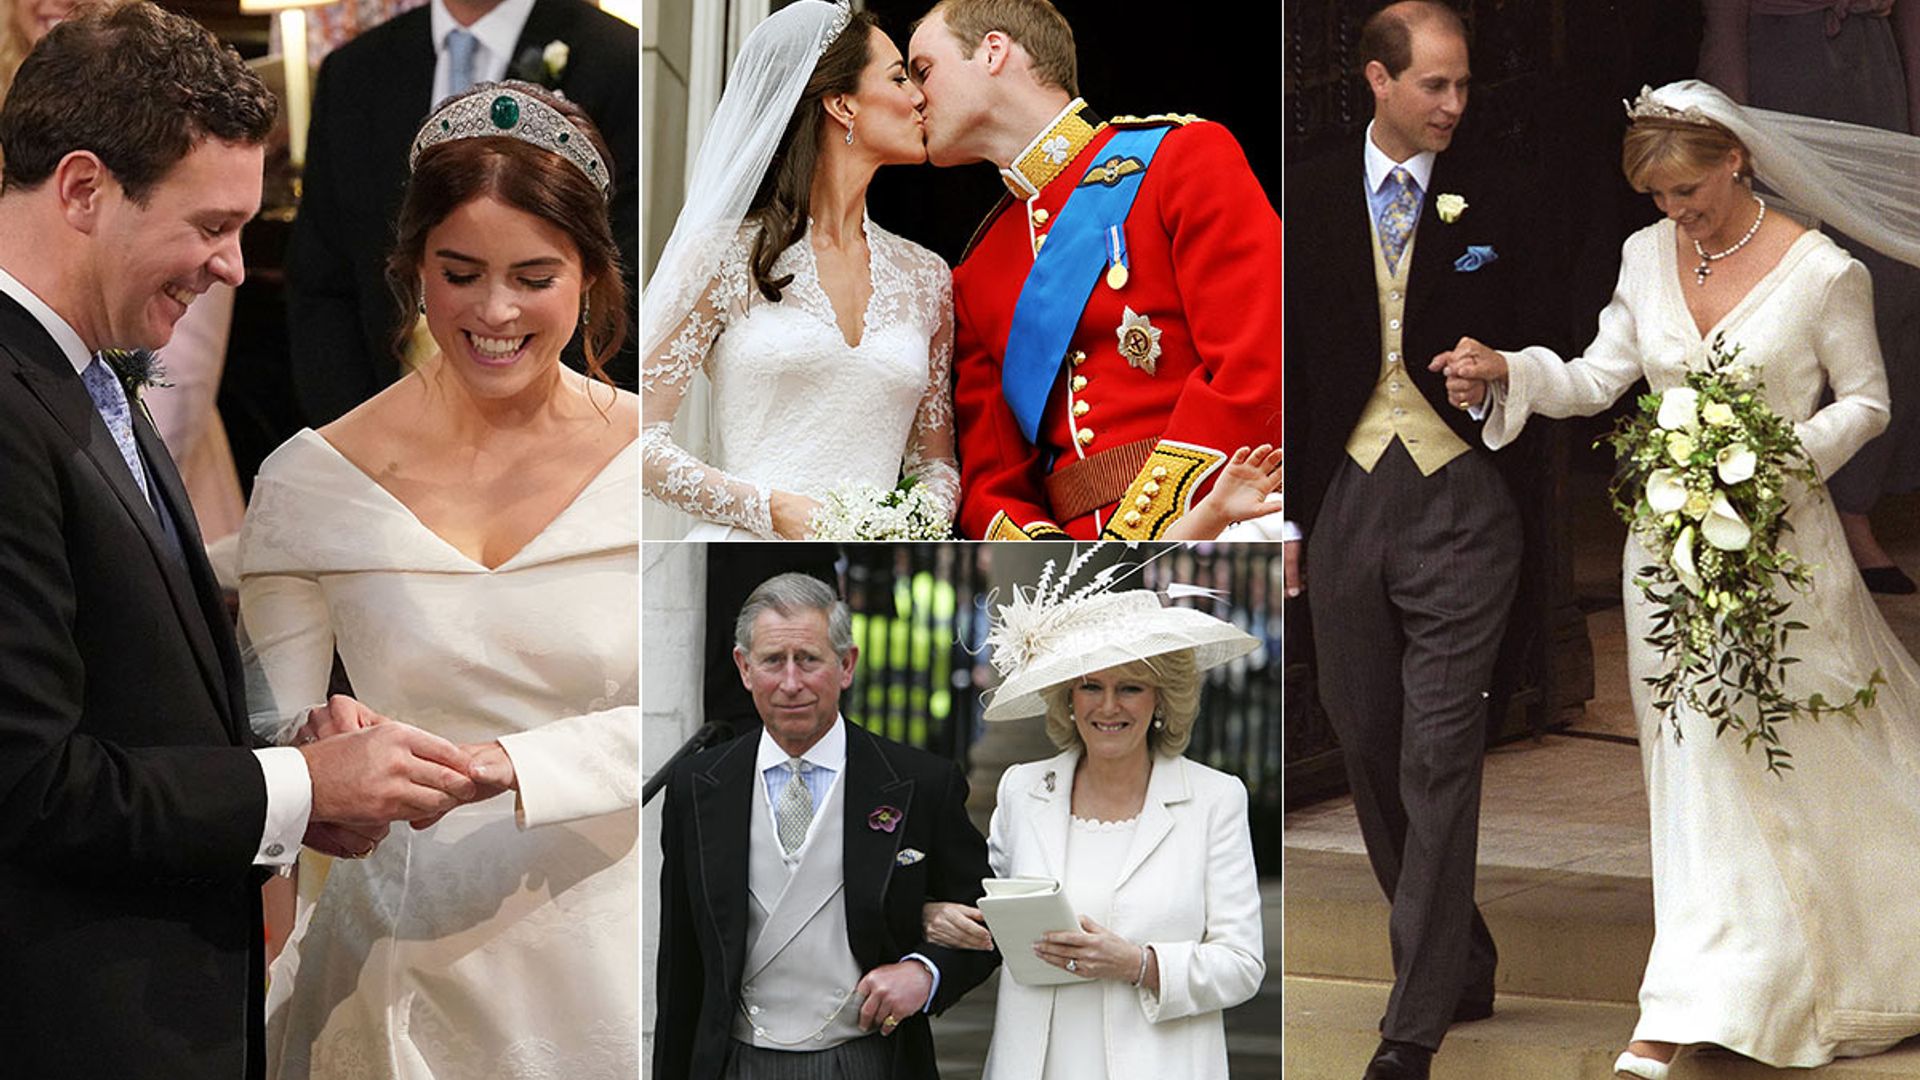 Slowly but surely: 7 royal couples who waited a long time before marrying